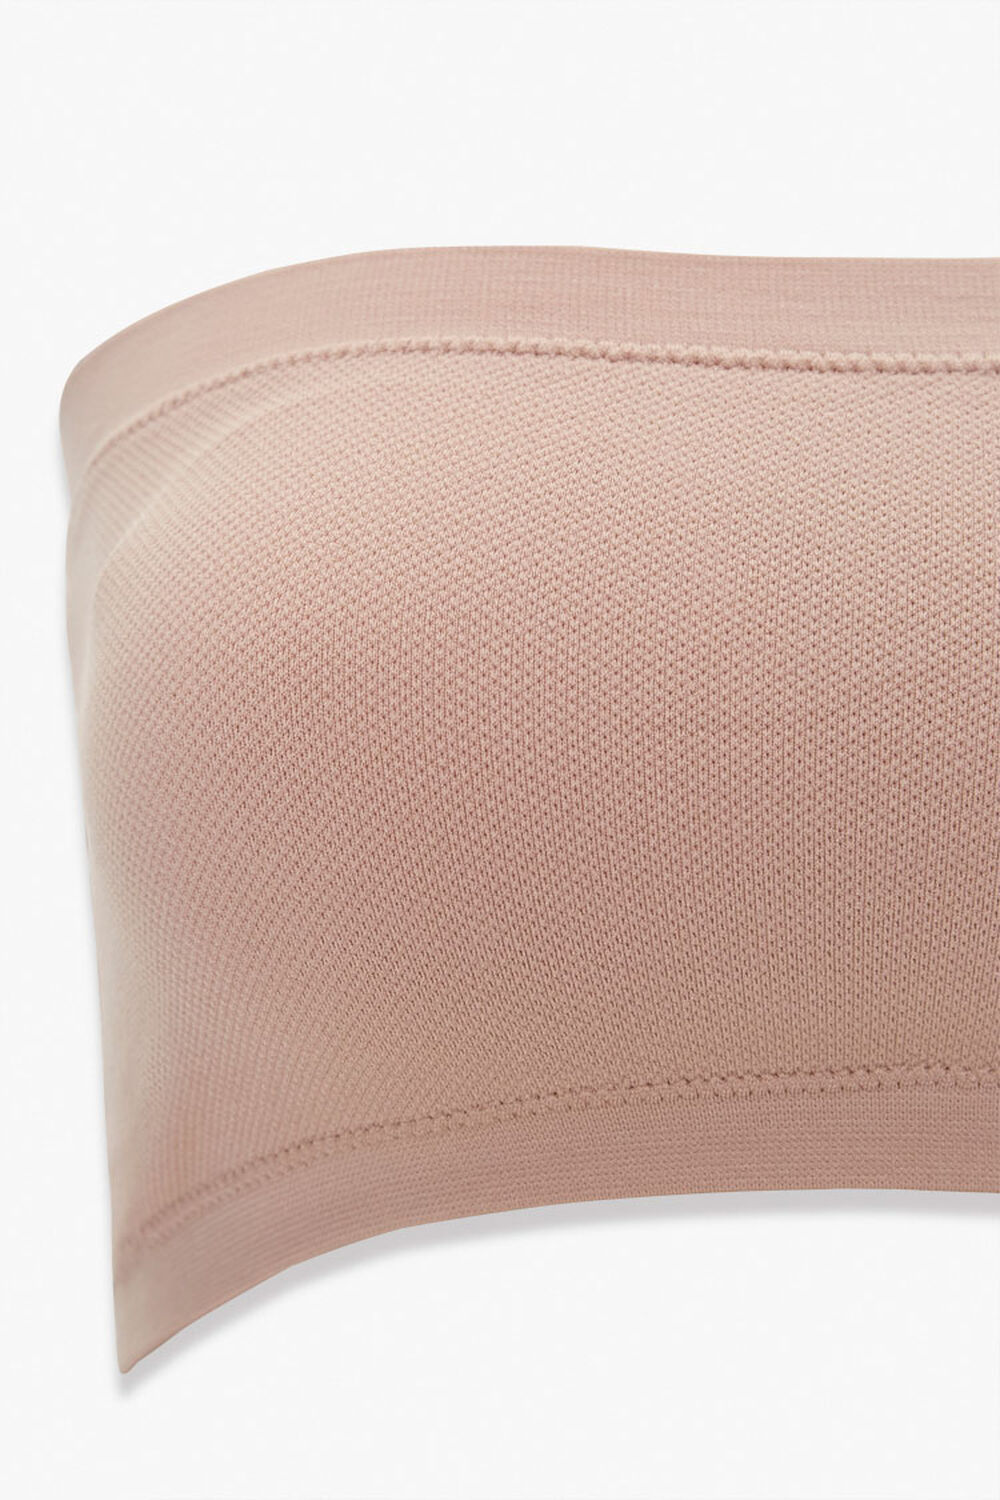 TAUPE Seamless Textured Knit Bandeau, image 3